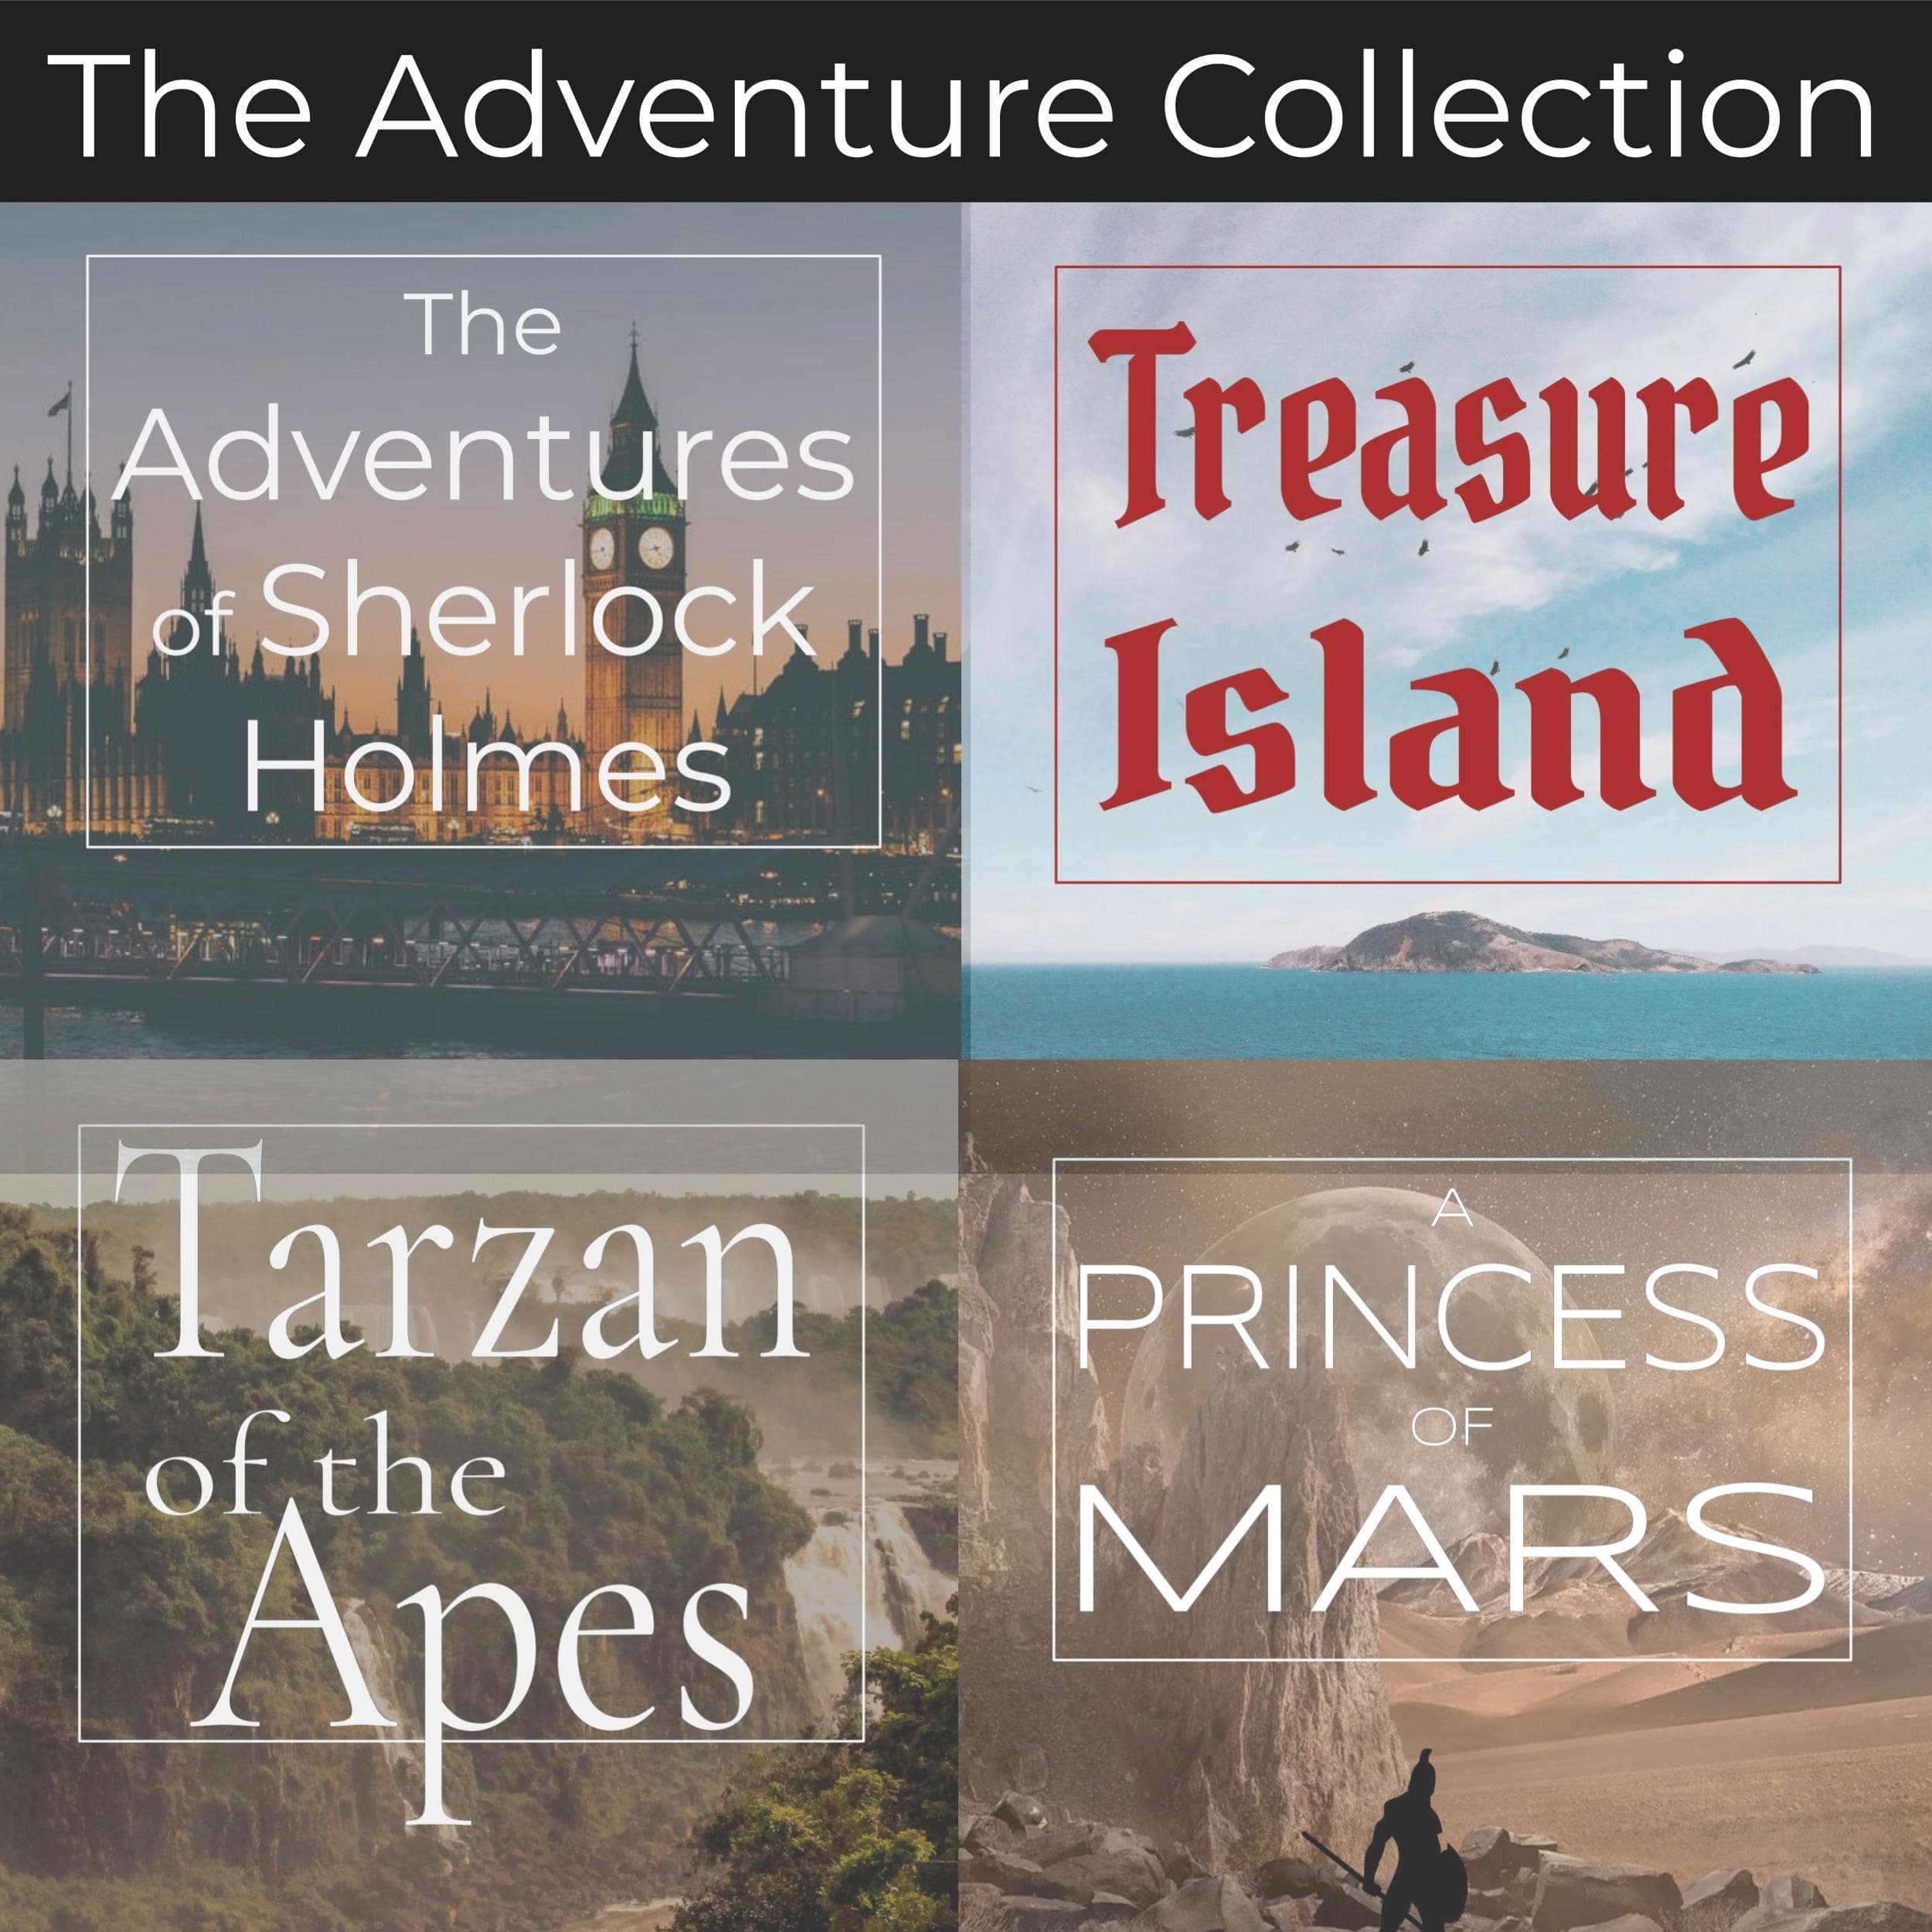 The Adventure Collection – 4 Classic Novels: Unabridged Audiobooks of Treasure Island, A Princess of Mars, Tarzan of the Apes, and The Adventures of Sherlock Holmes